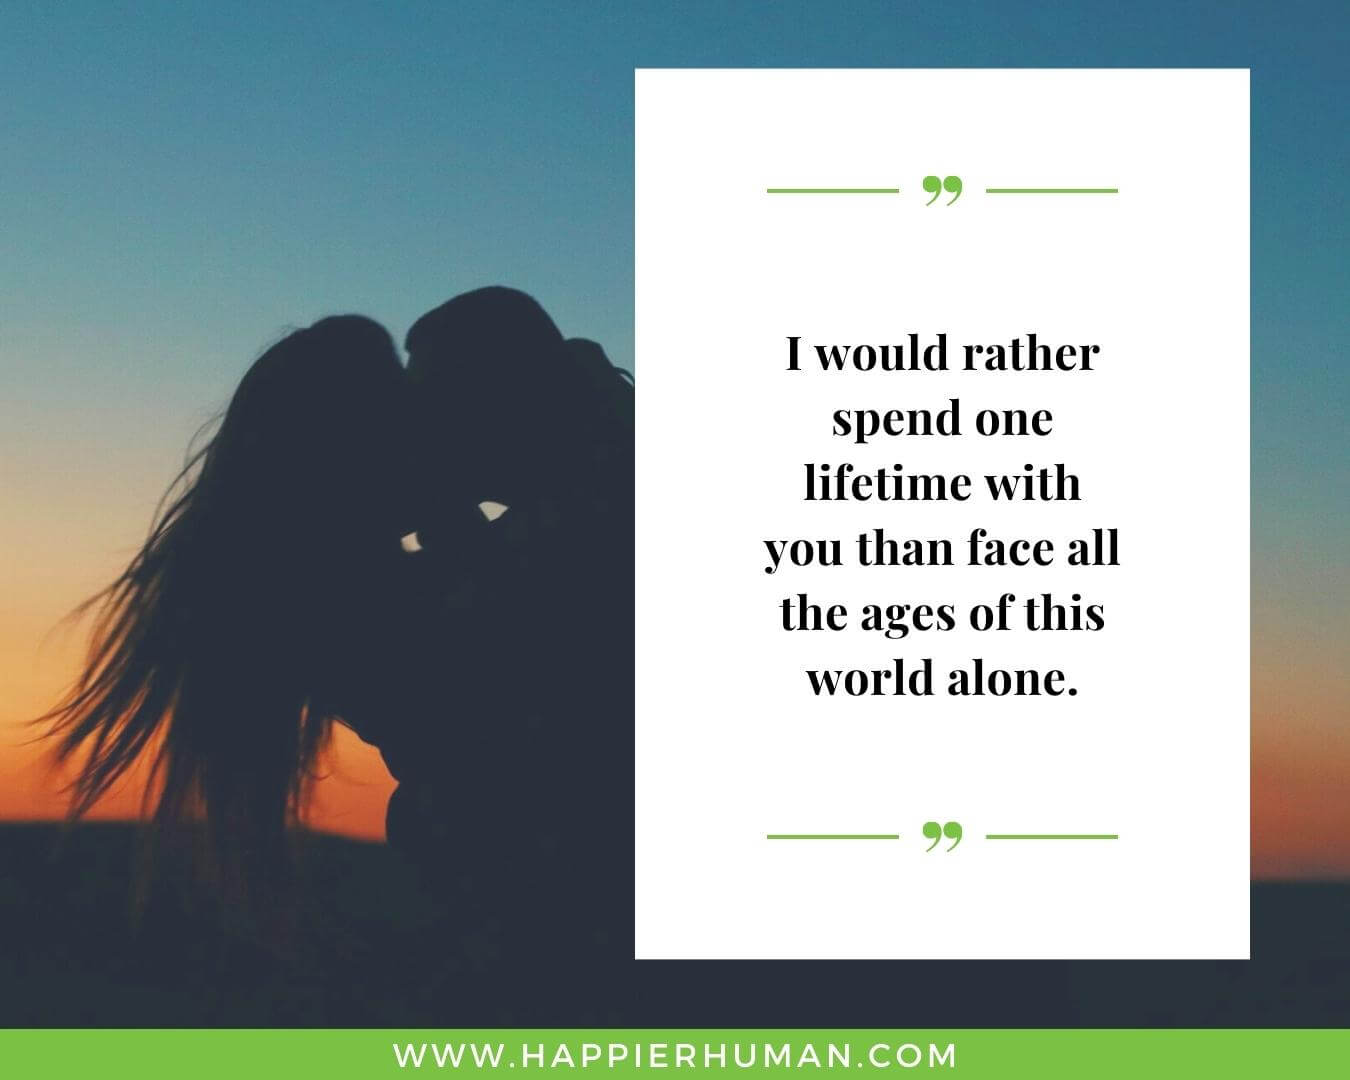 Unconditional Love Quotes for Her - “I would rather spend one lifetime with you than face all the ages of this world alone.”